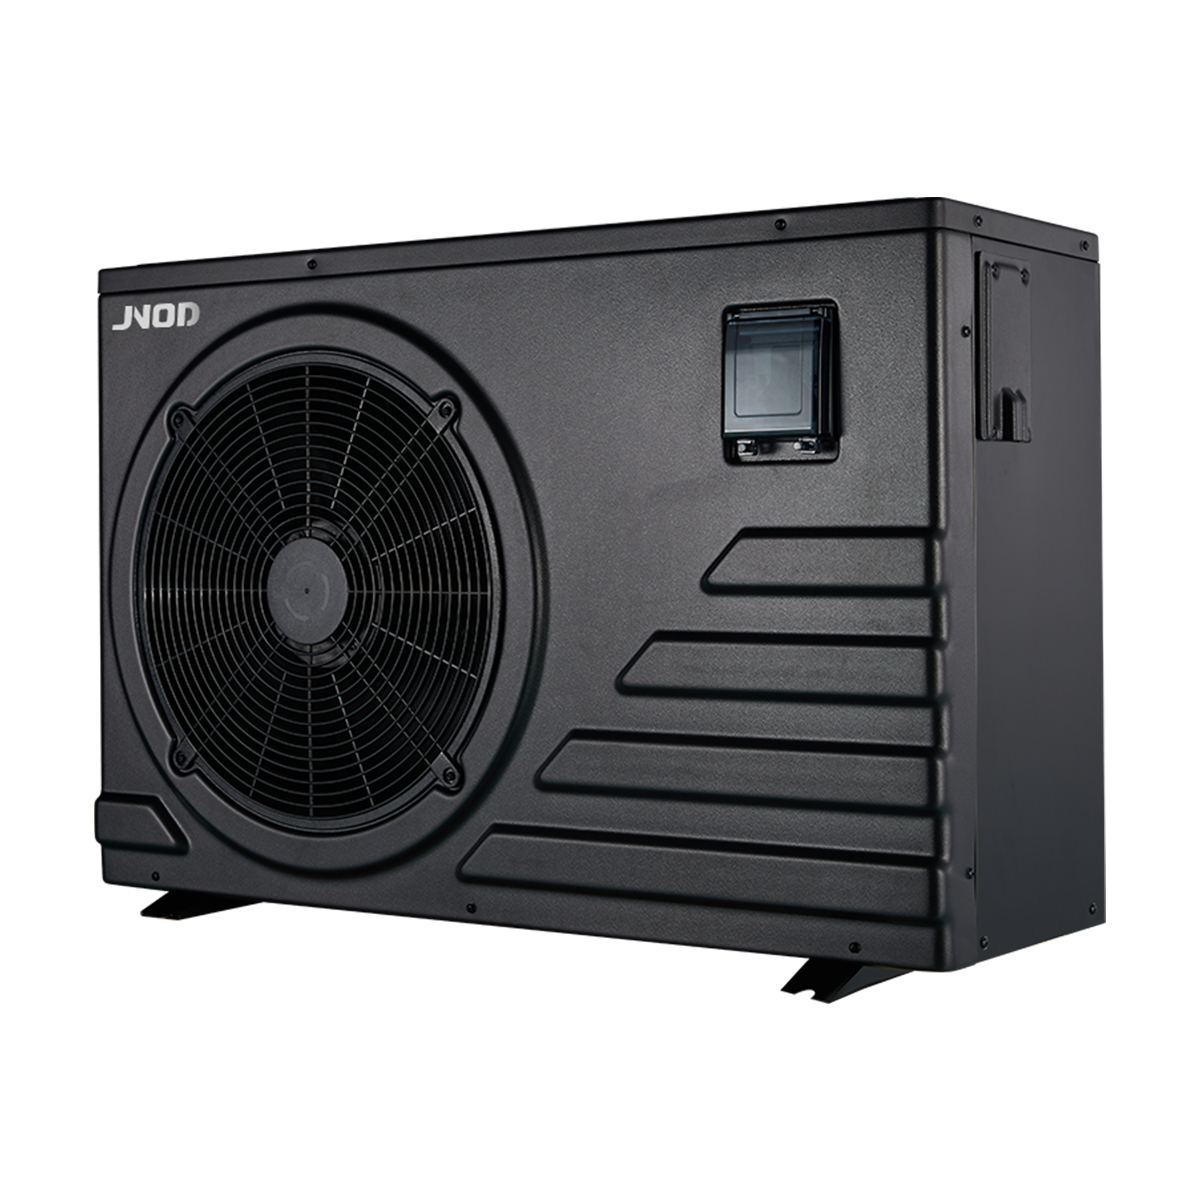 Dc Inverter Commercial Swimming Pool Heat Pump For Sauna